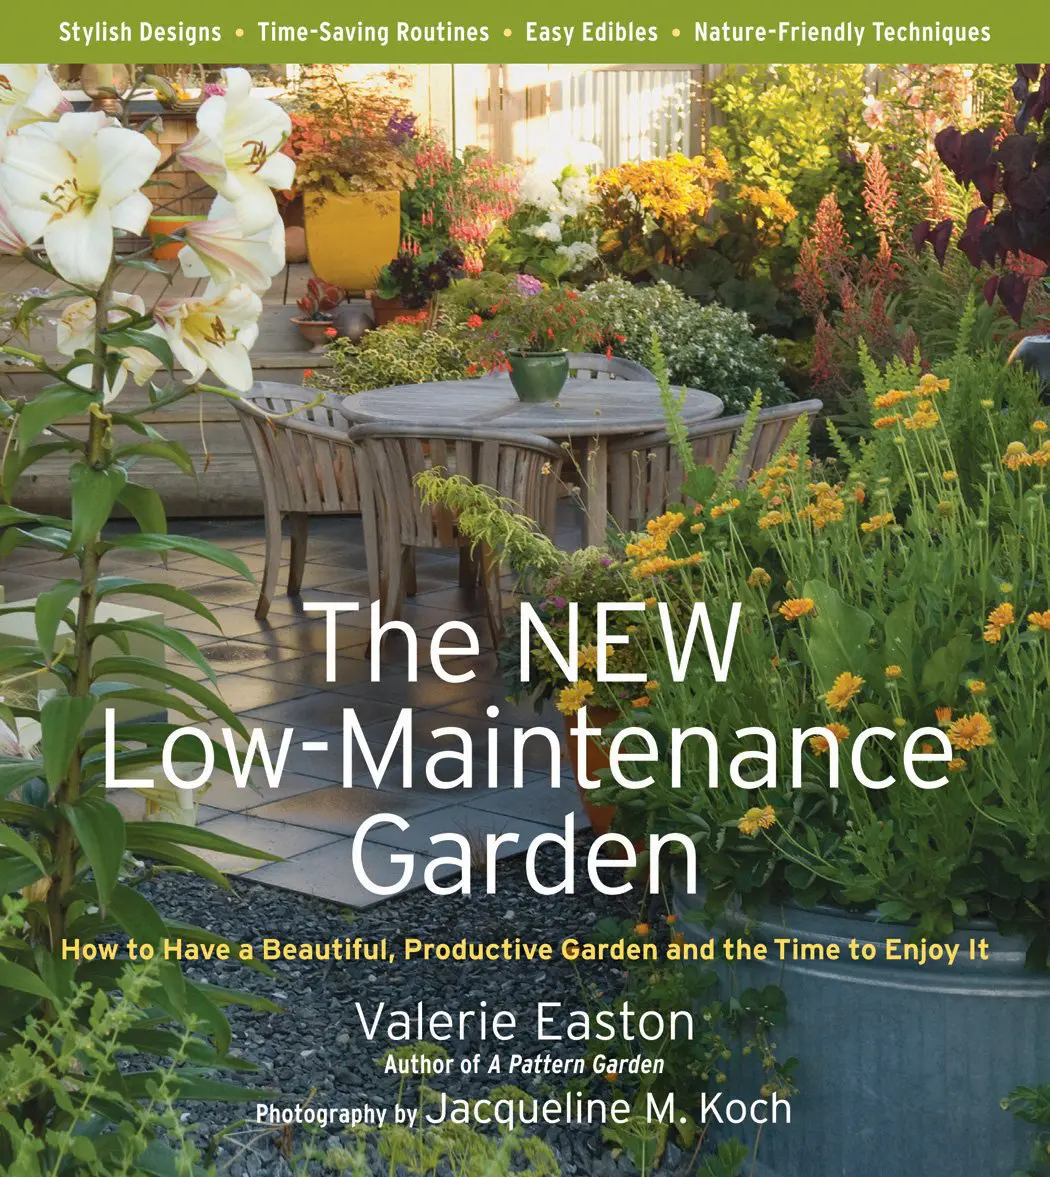 The New Low-Maintenance Garden Low maintenance lawn alternatives for eco-friendly lawns